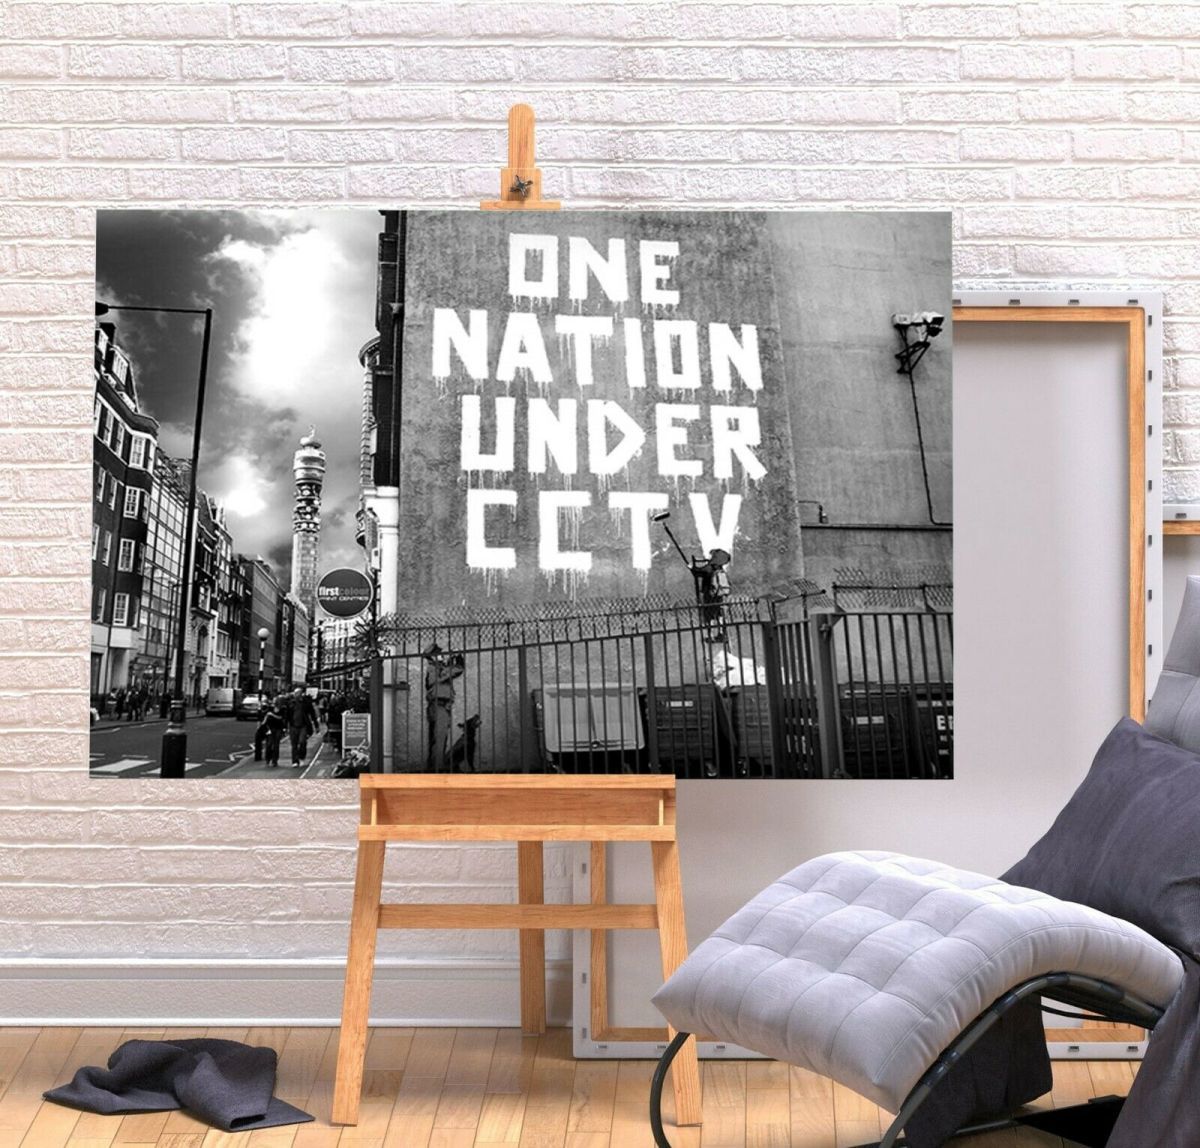 Banksy High Quality Canvas Frame Poster Picture A1 Art Panel Nordic Overseas Photo Goods Painting Cafe Interior ONE NATION CCTV, Printed materials, Poster, others